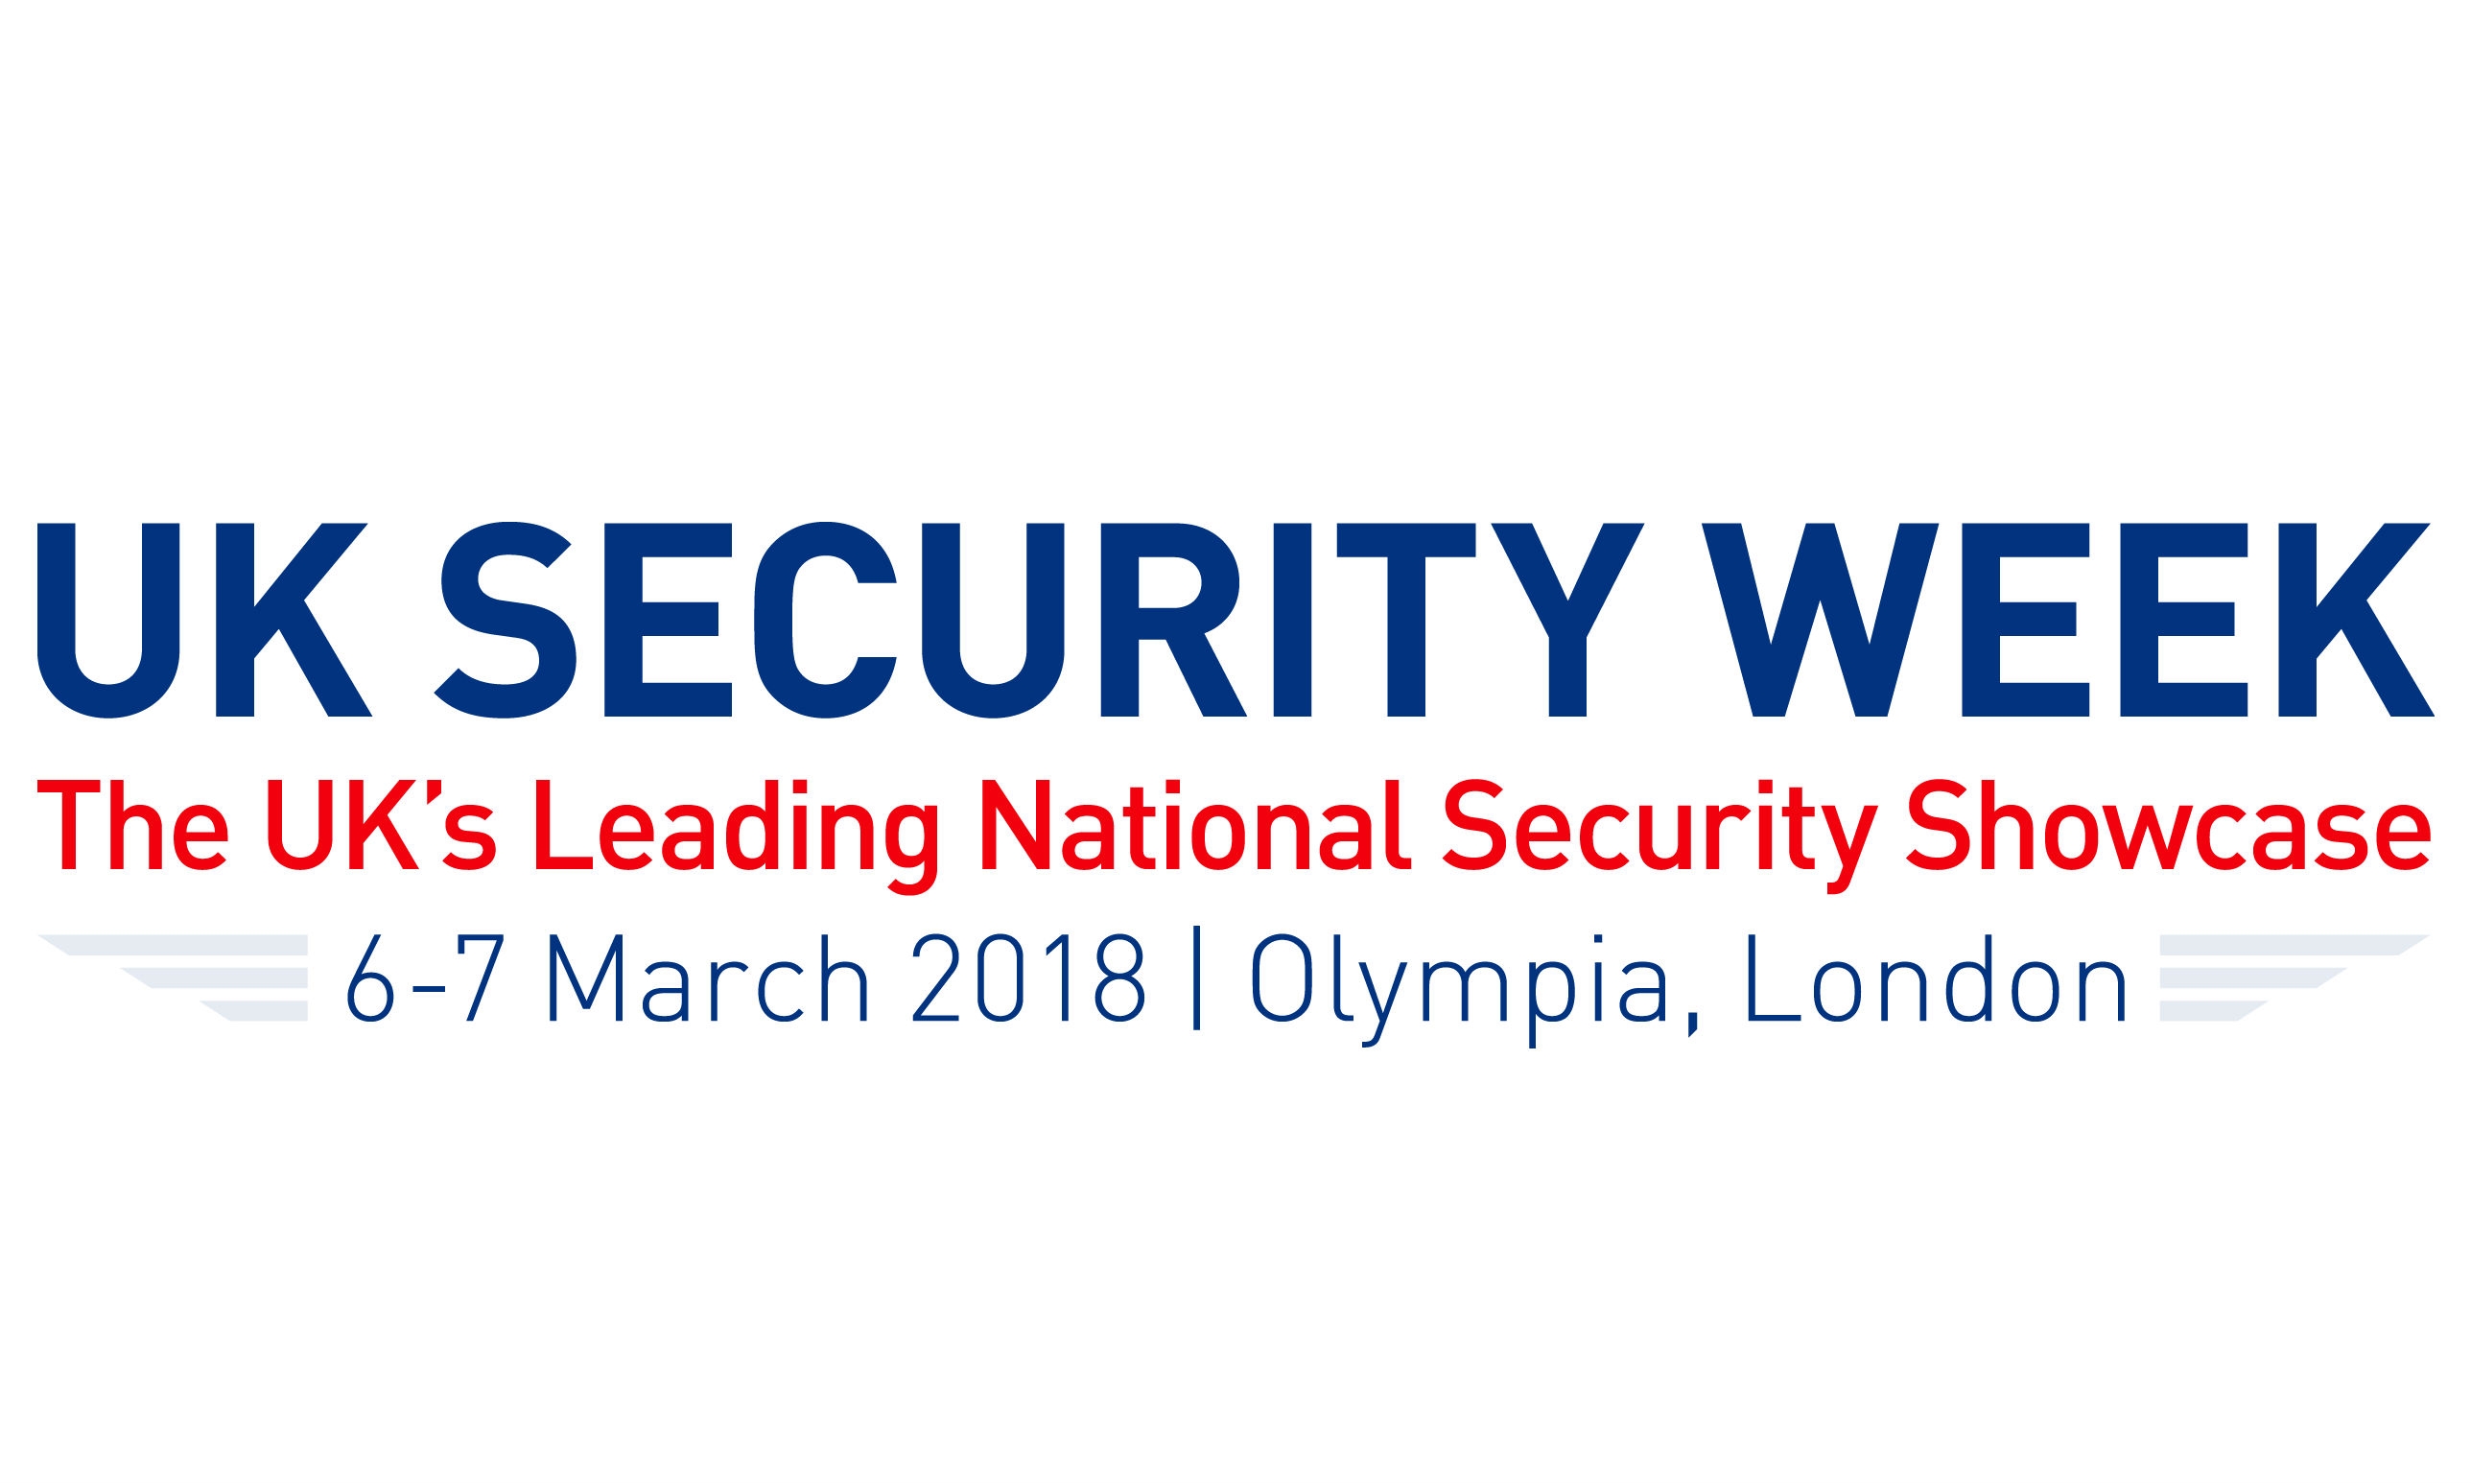 UK Security Week launches in March 2018